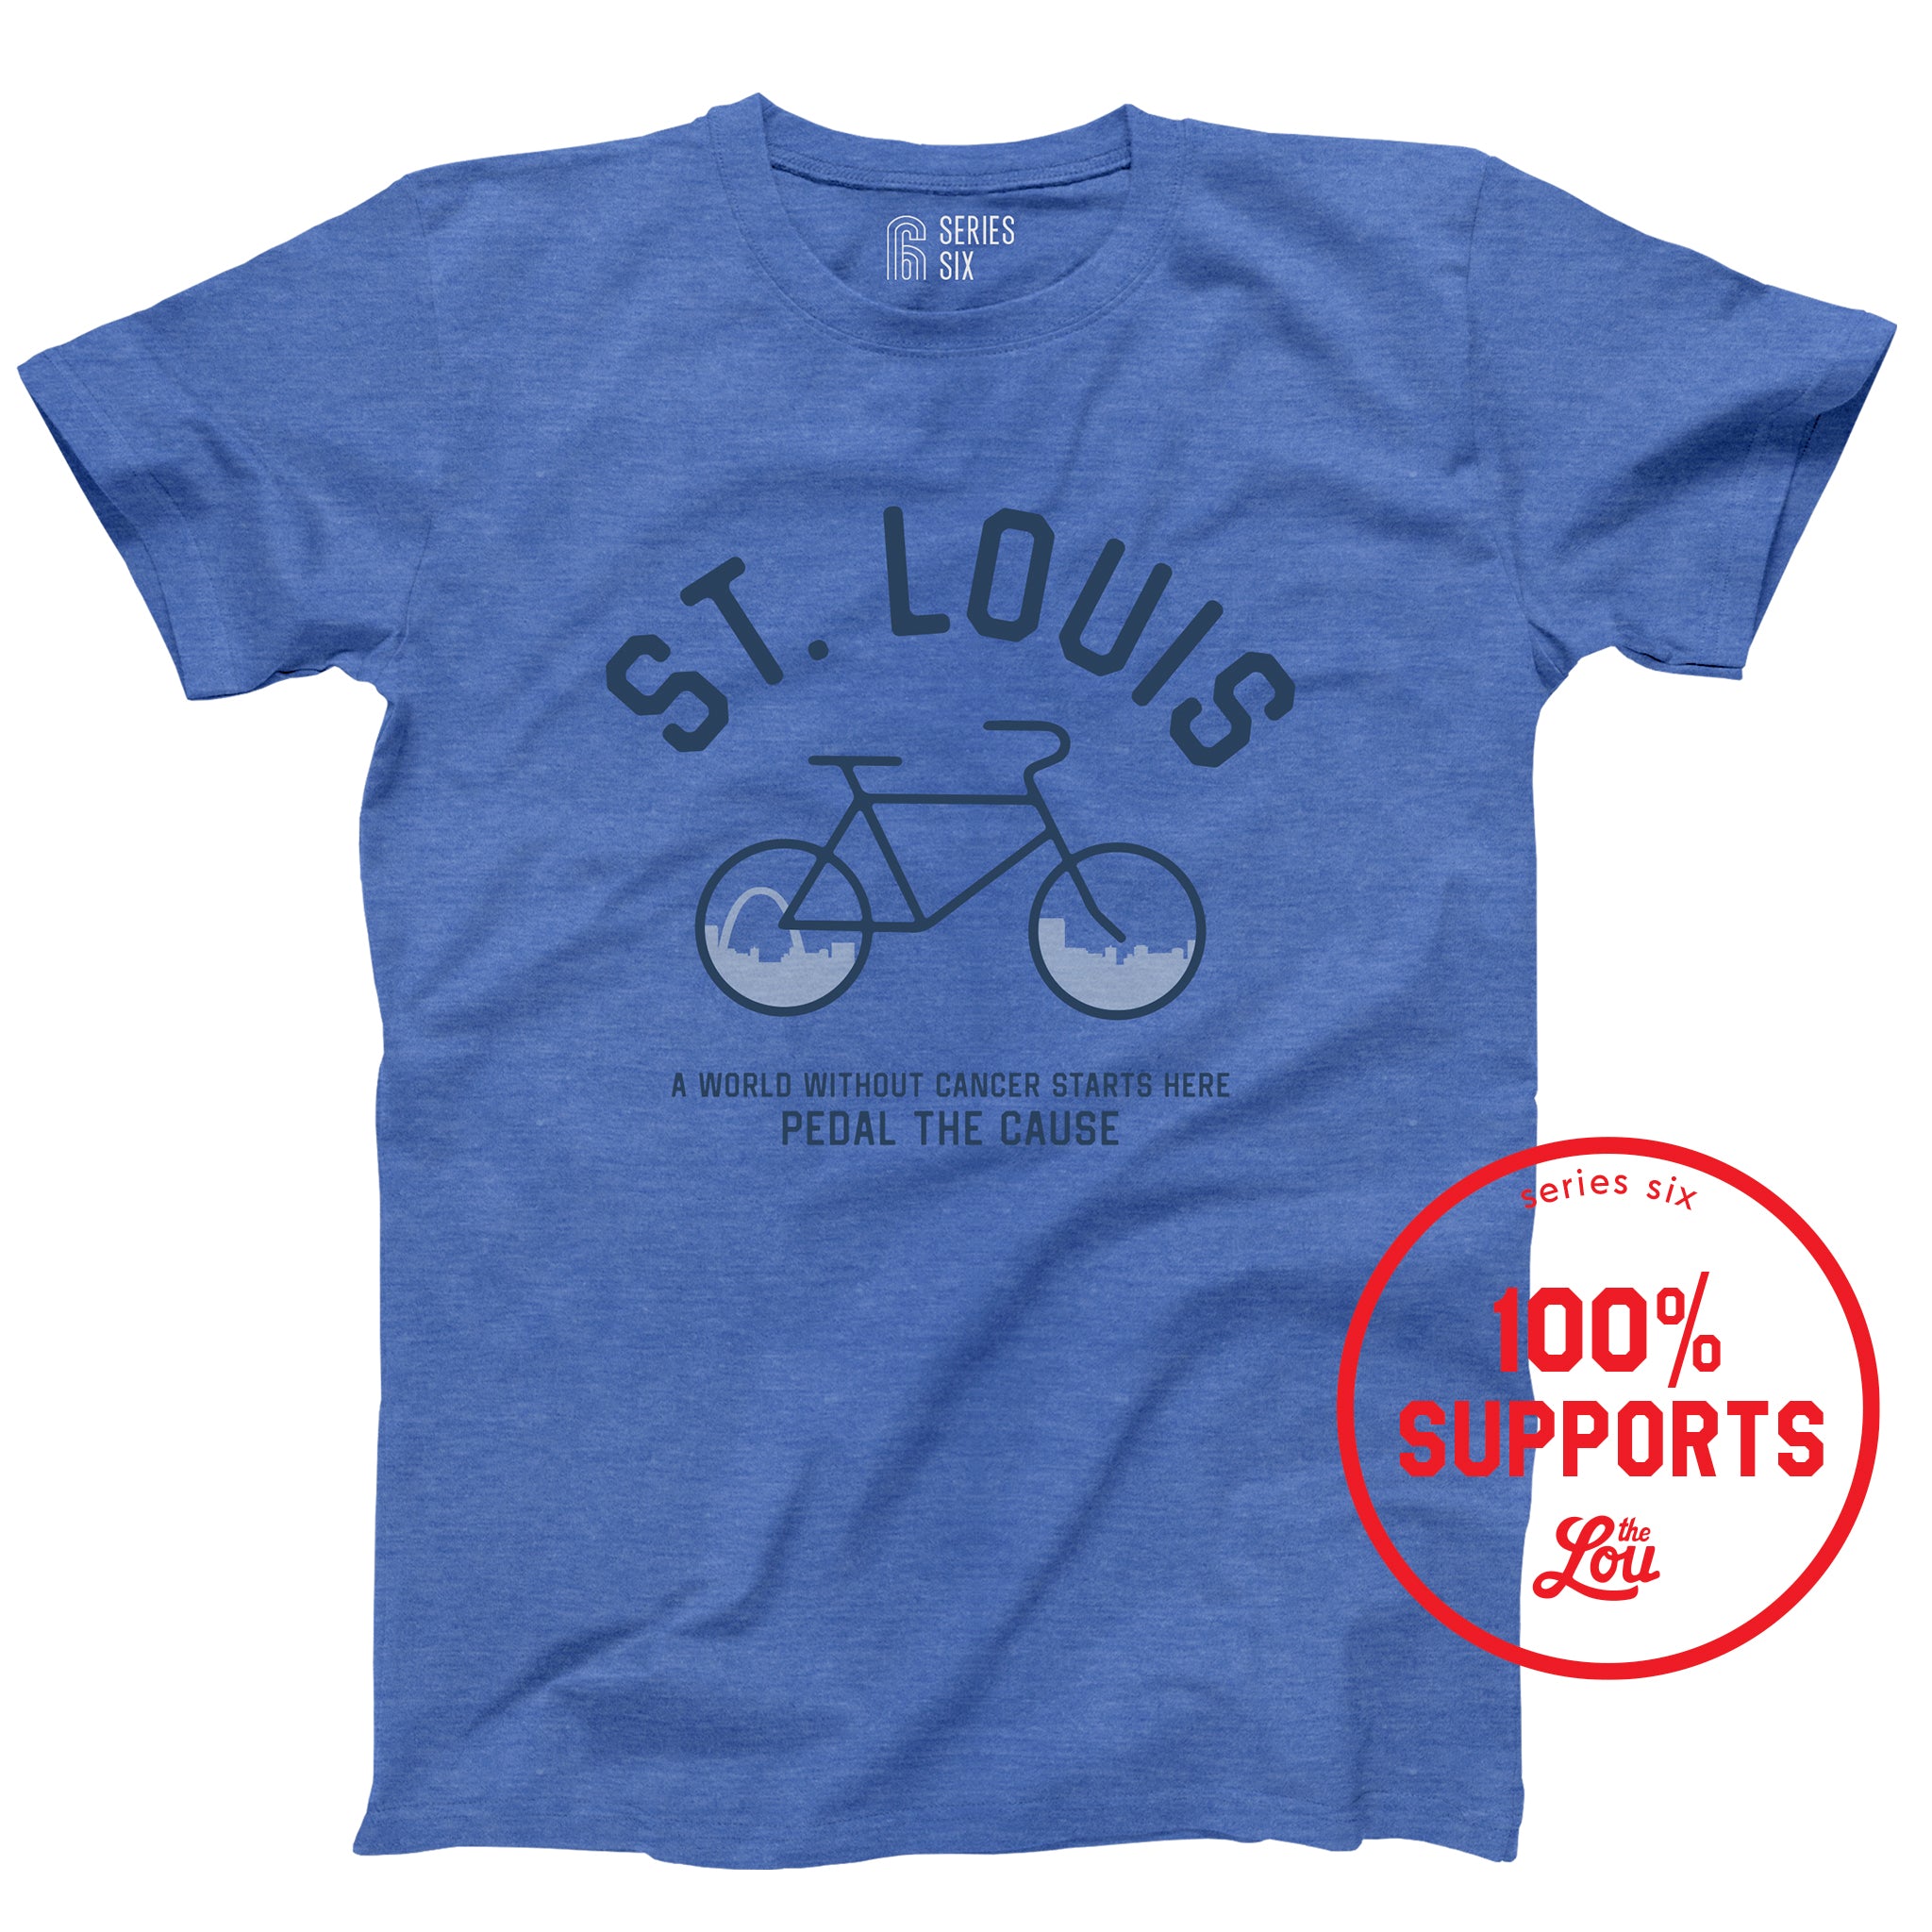 St Louis The Lou T-Shirts for Sale